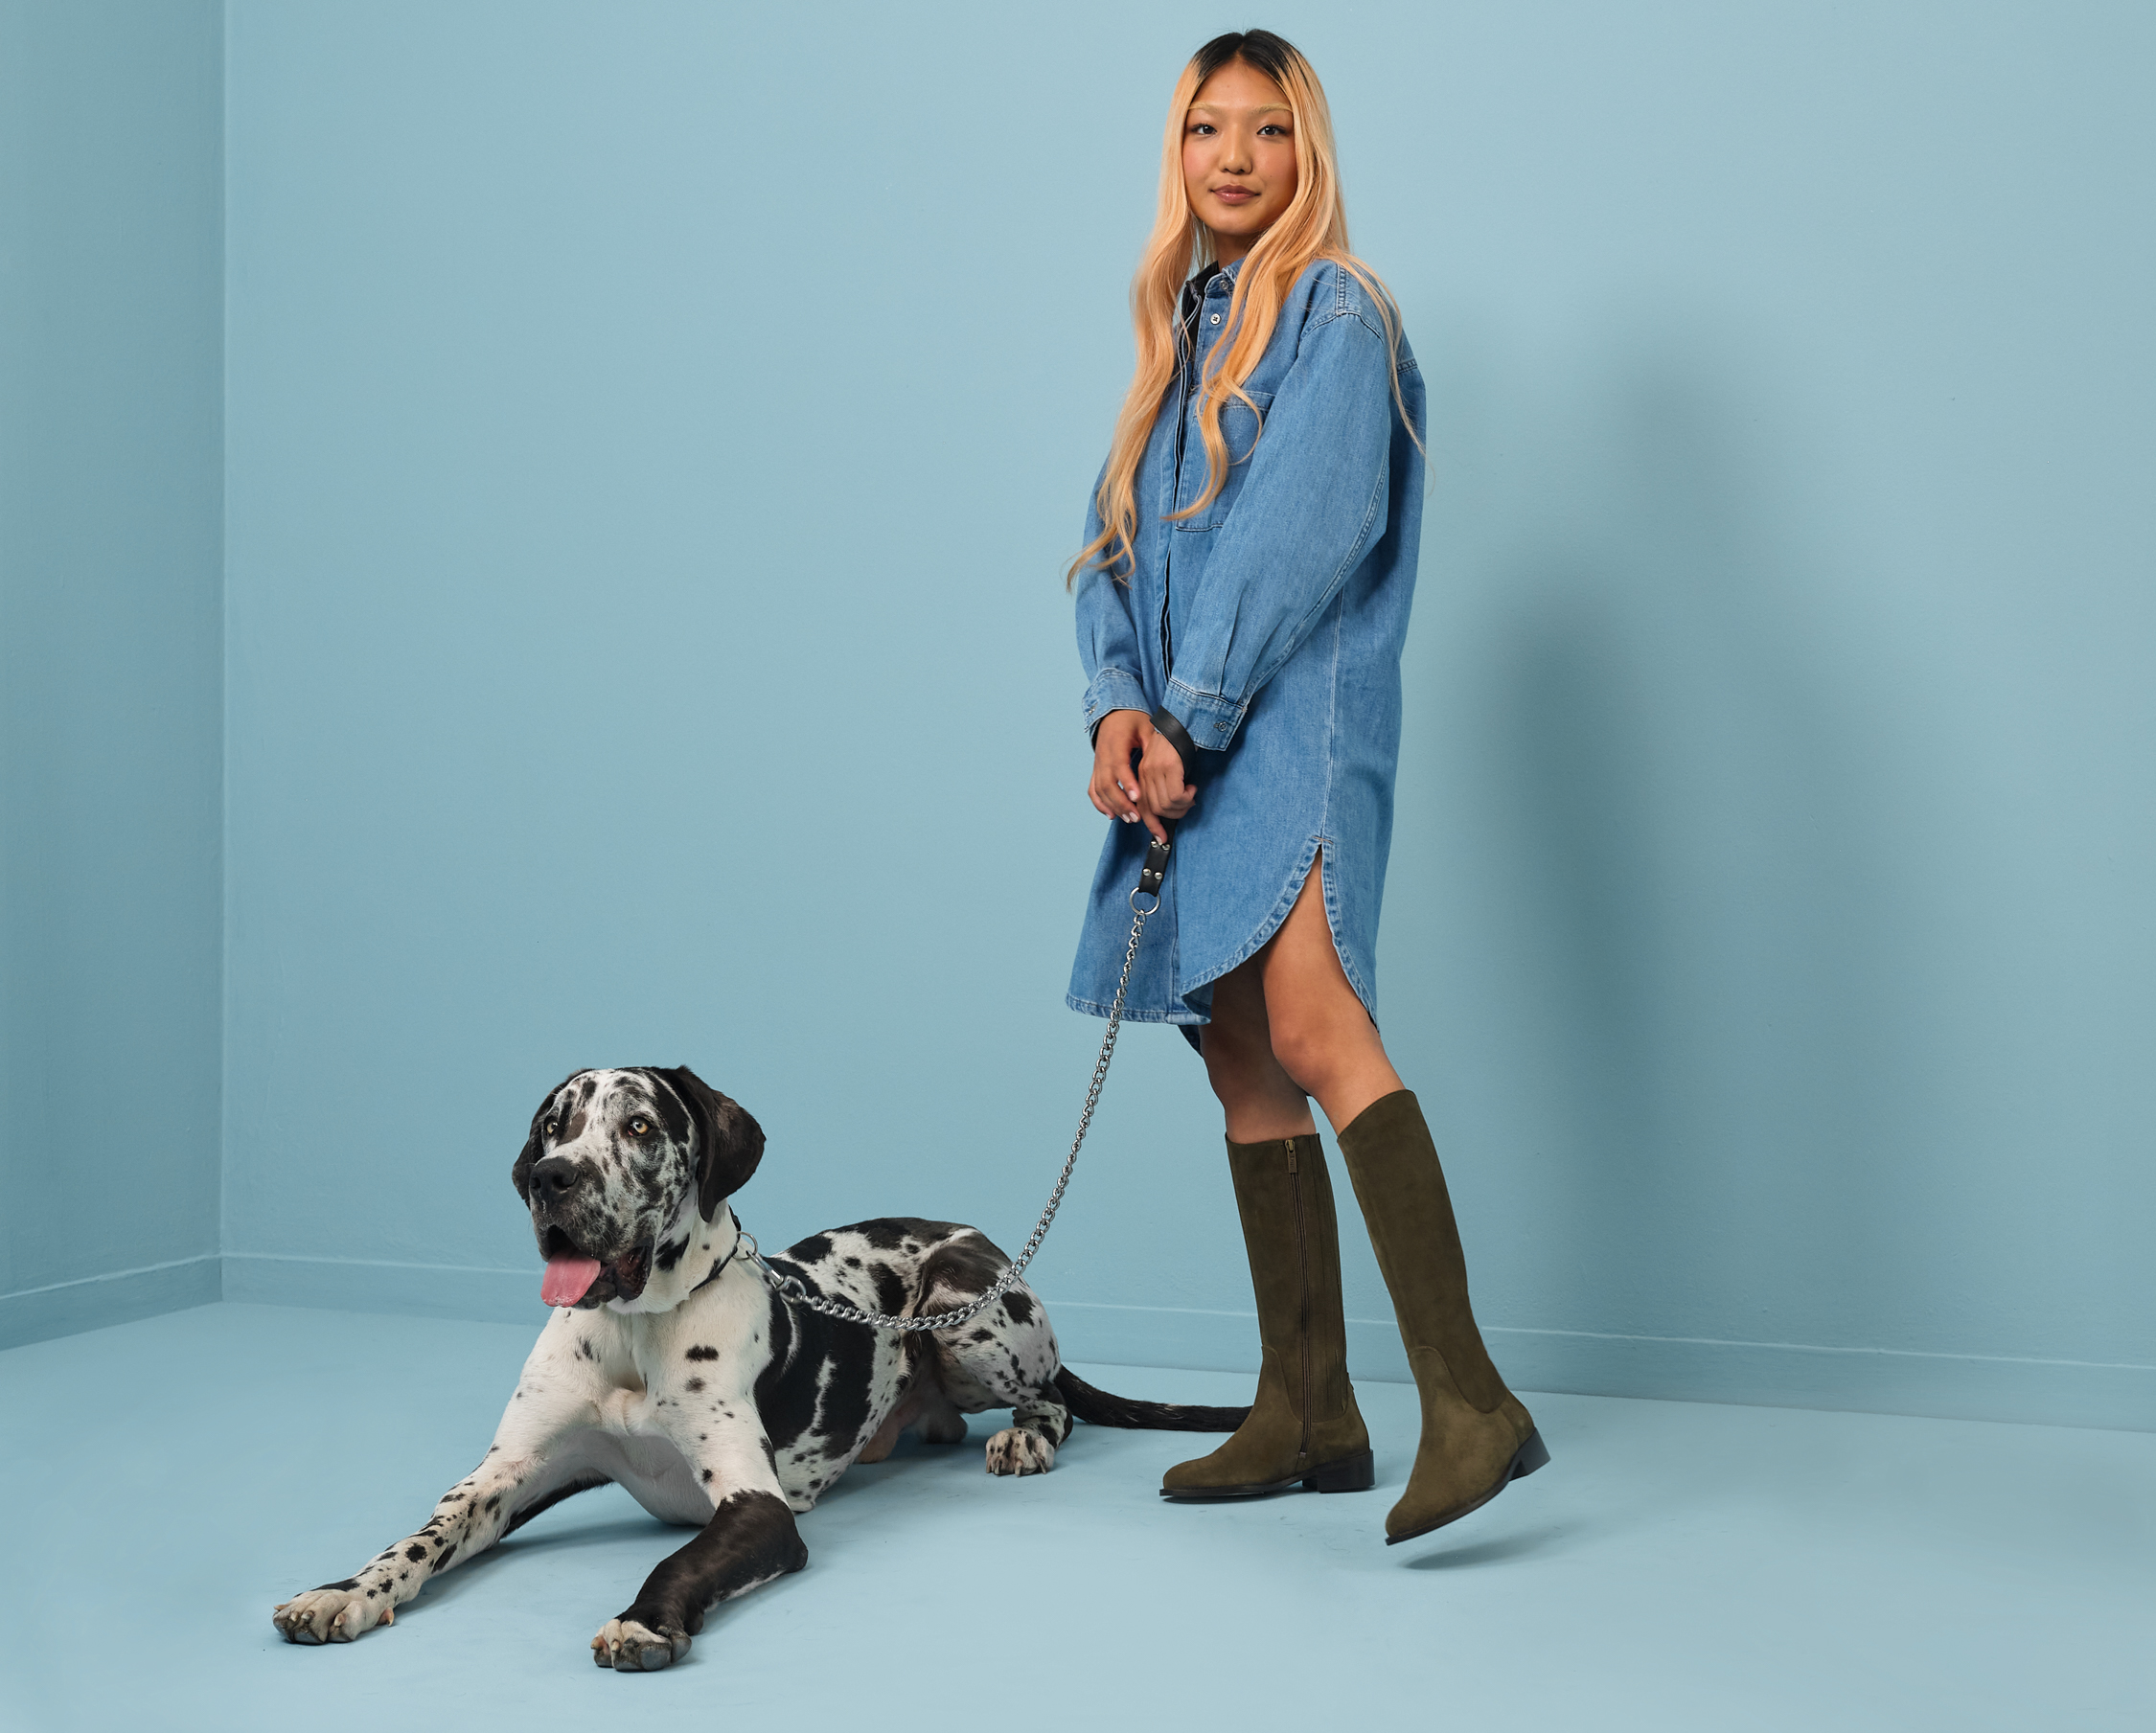 The Best Dog Walking Boots for Women